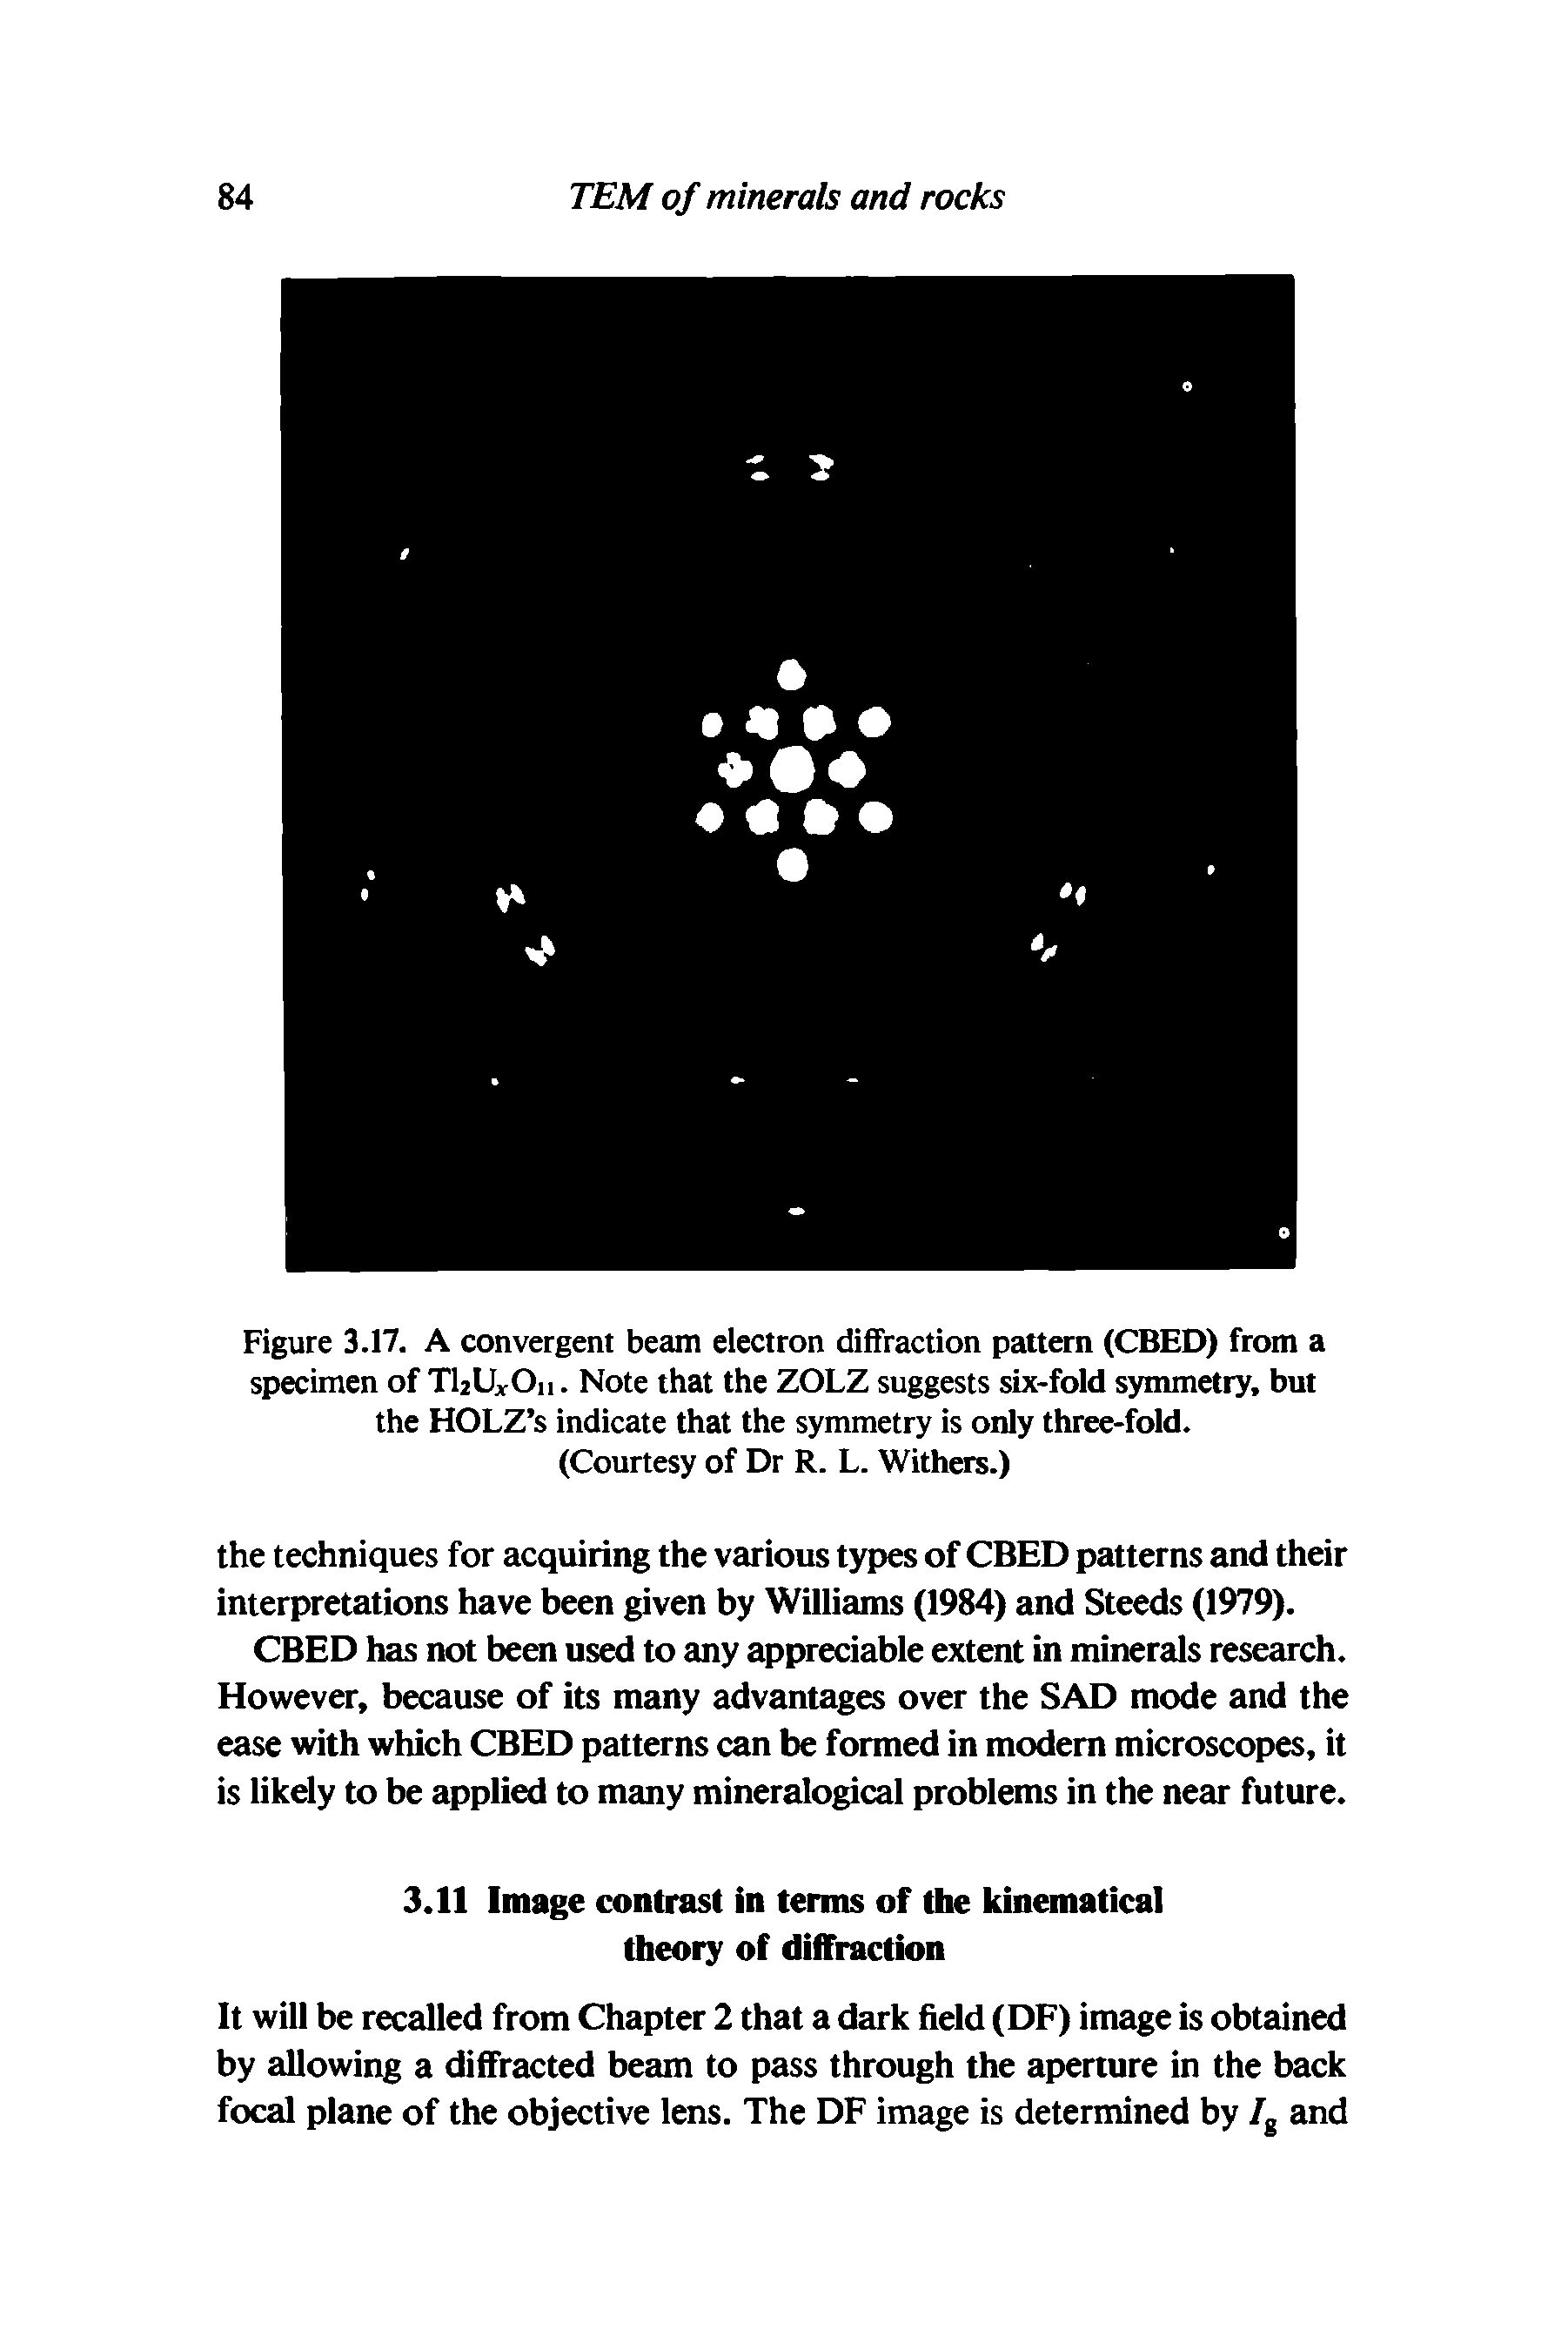 Figure 3.17. A convergent beam electron diffraction pattern (CBED) from a specimen of TUHrOn. Note that the ZOLZ suggests six-fold symmetry, but the HOLZ s indicate that the symmetry is only three-fold.